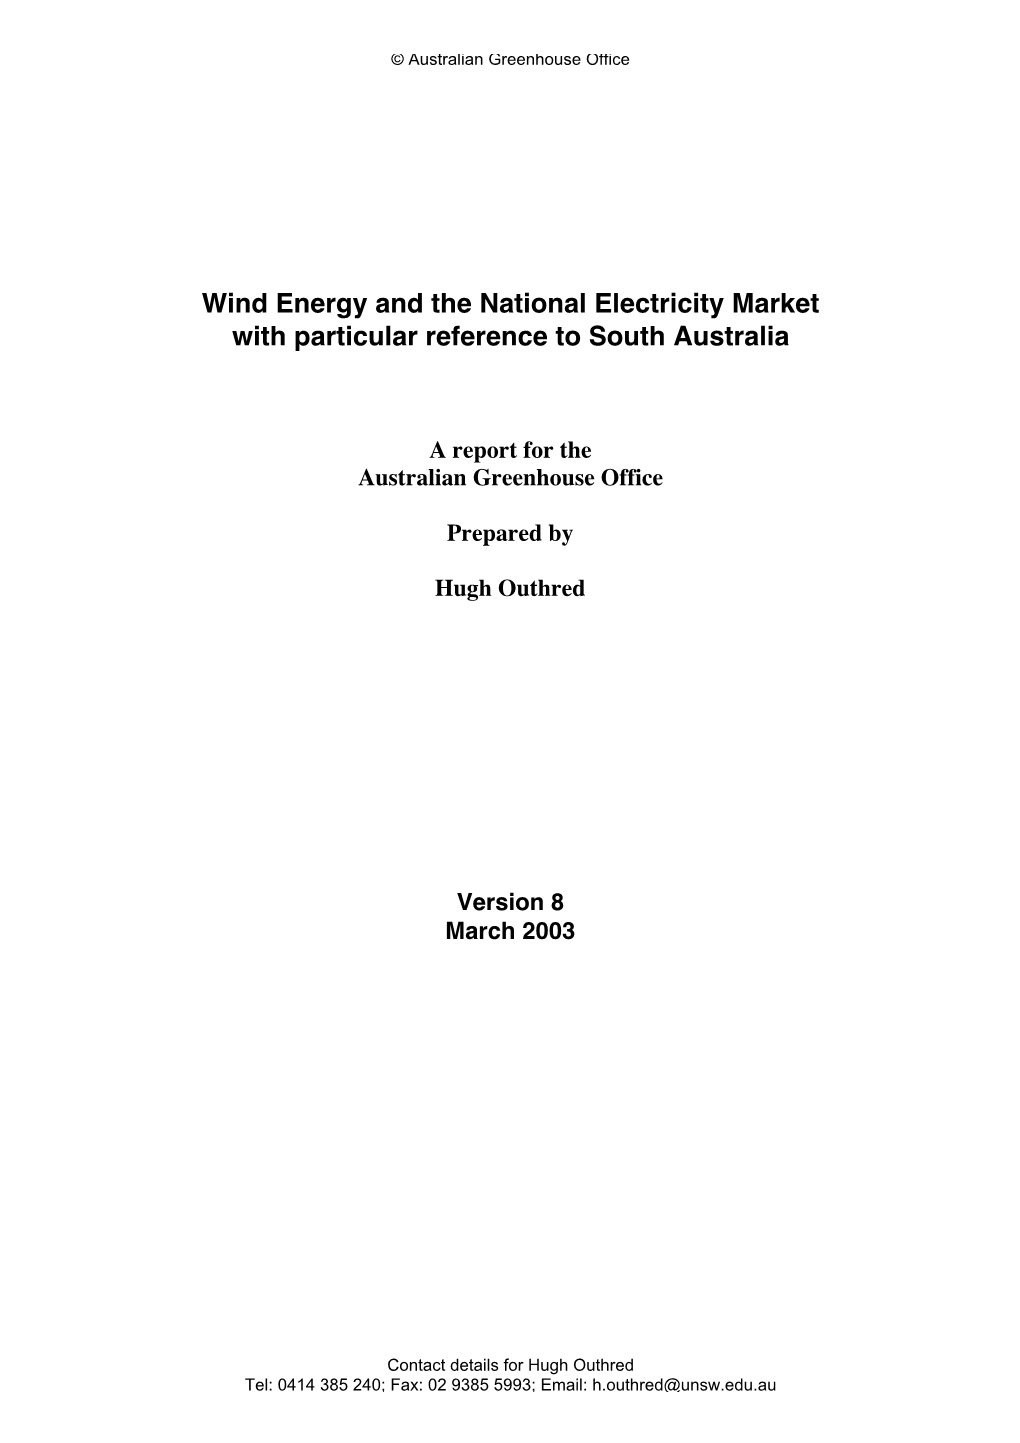 Wind Energy and the National Electricity Market with Particular Reference to South Australia